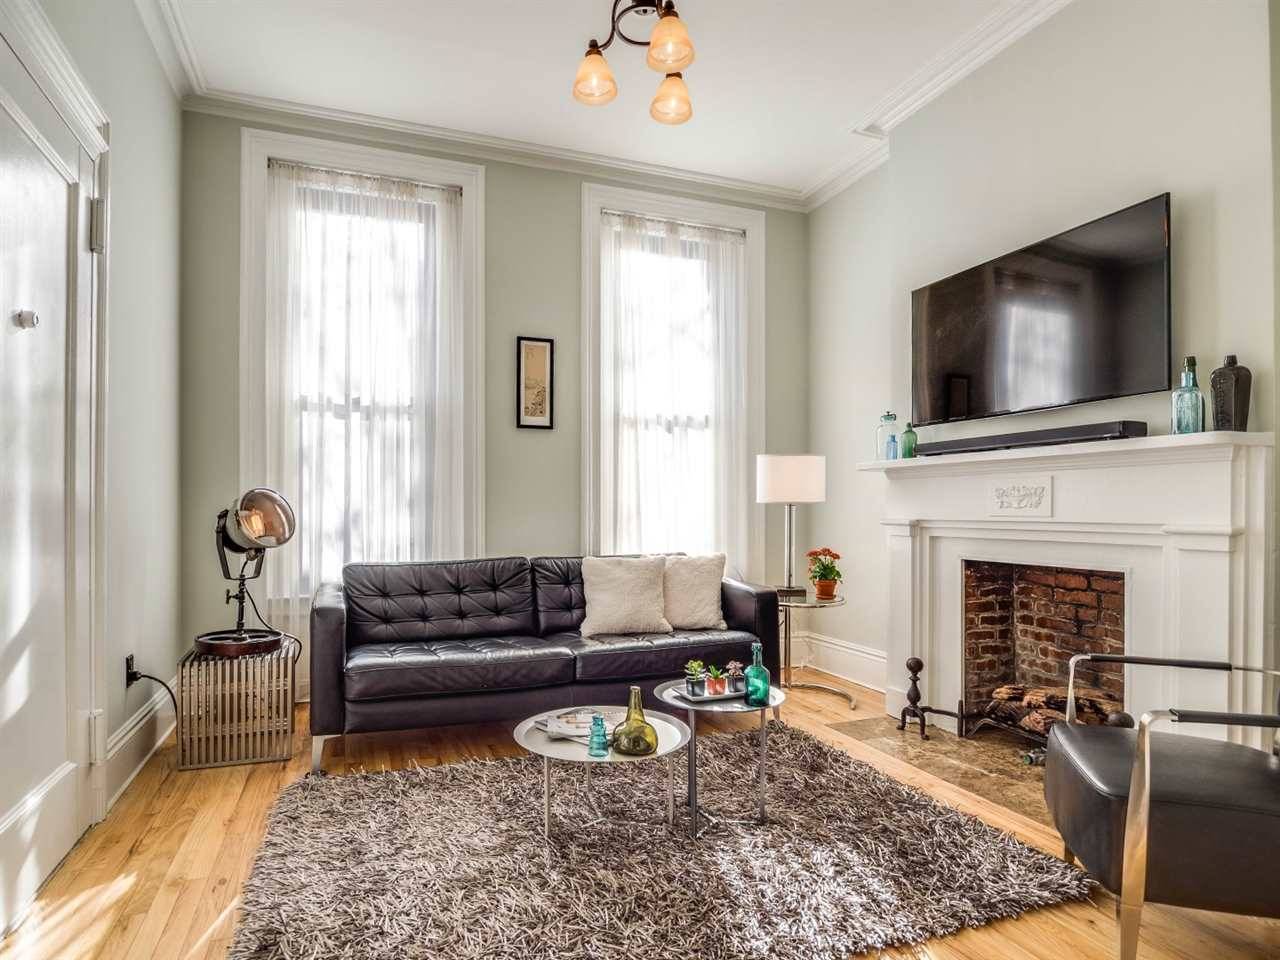 This home has it all - 1 BR Condo Historic Downtown New Jersey